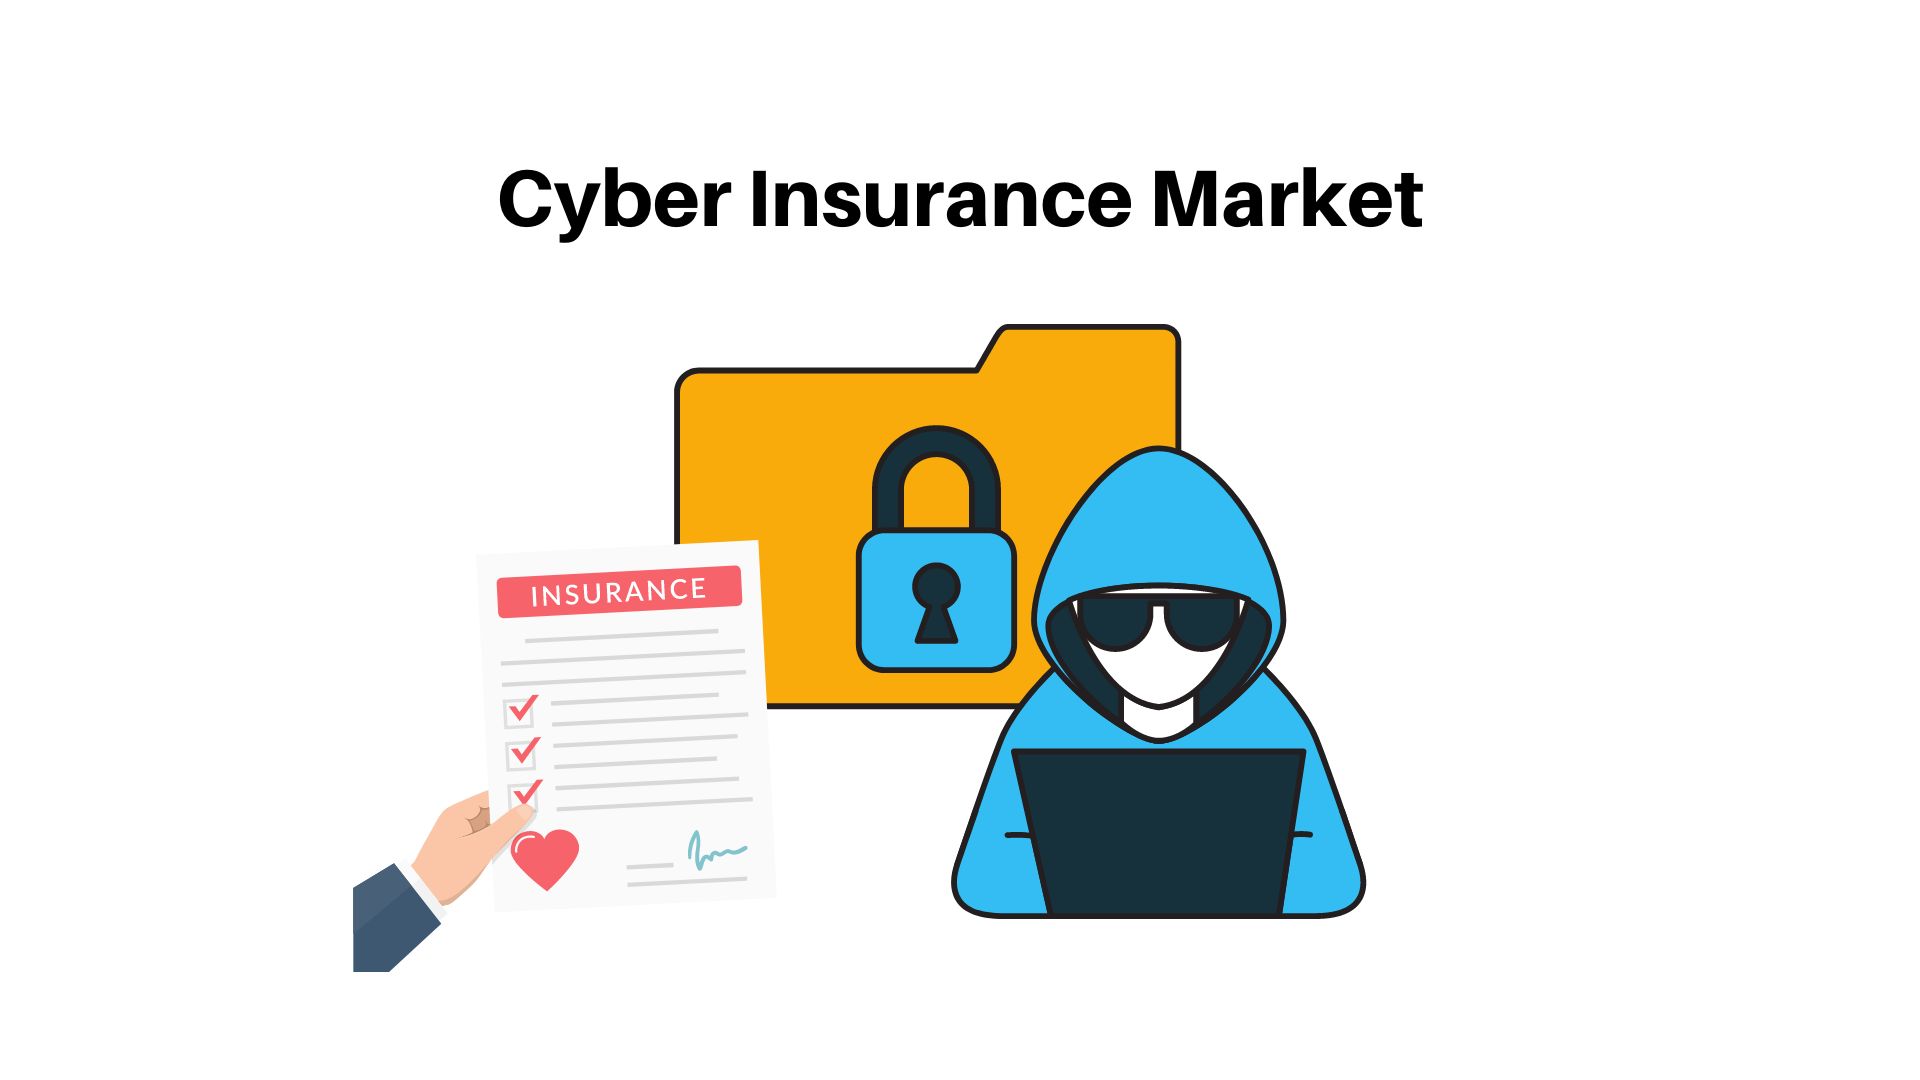 Cyber Insurance Market Is Booming at CAGR of 22.3%